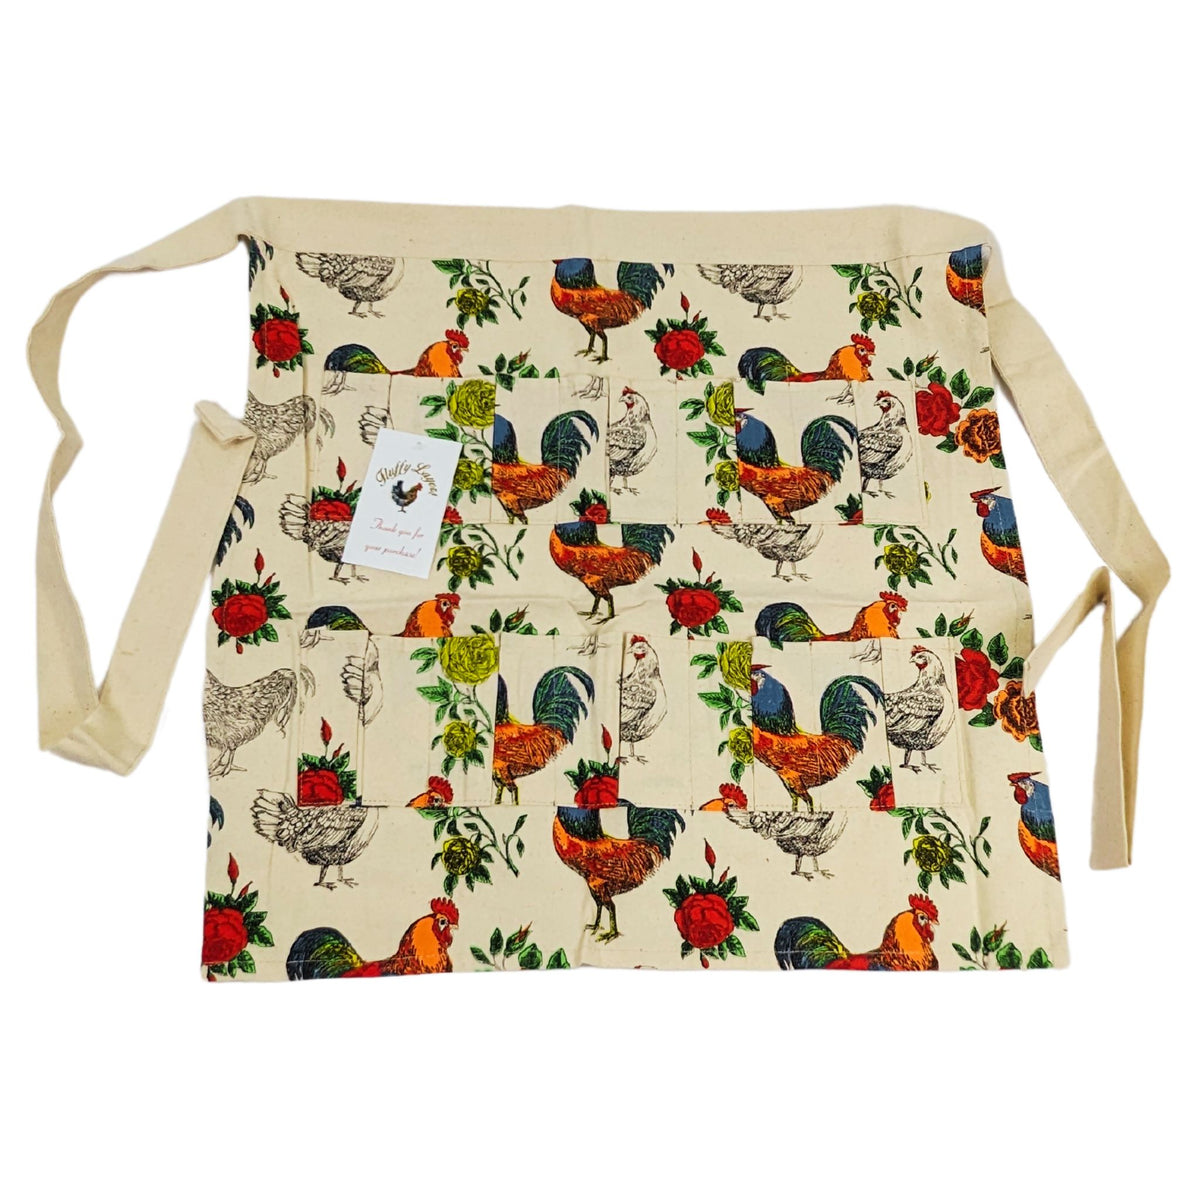 Fluffy Layers® Half Body Egg Collecting Apron